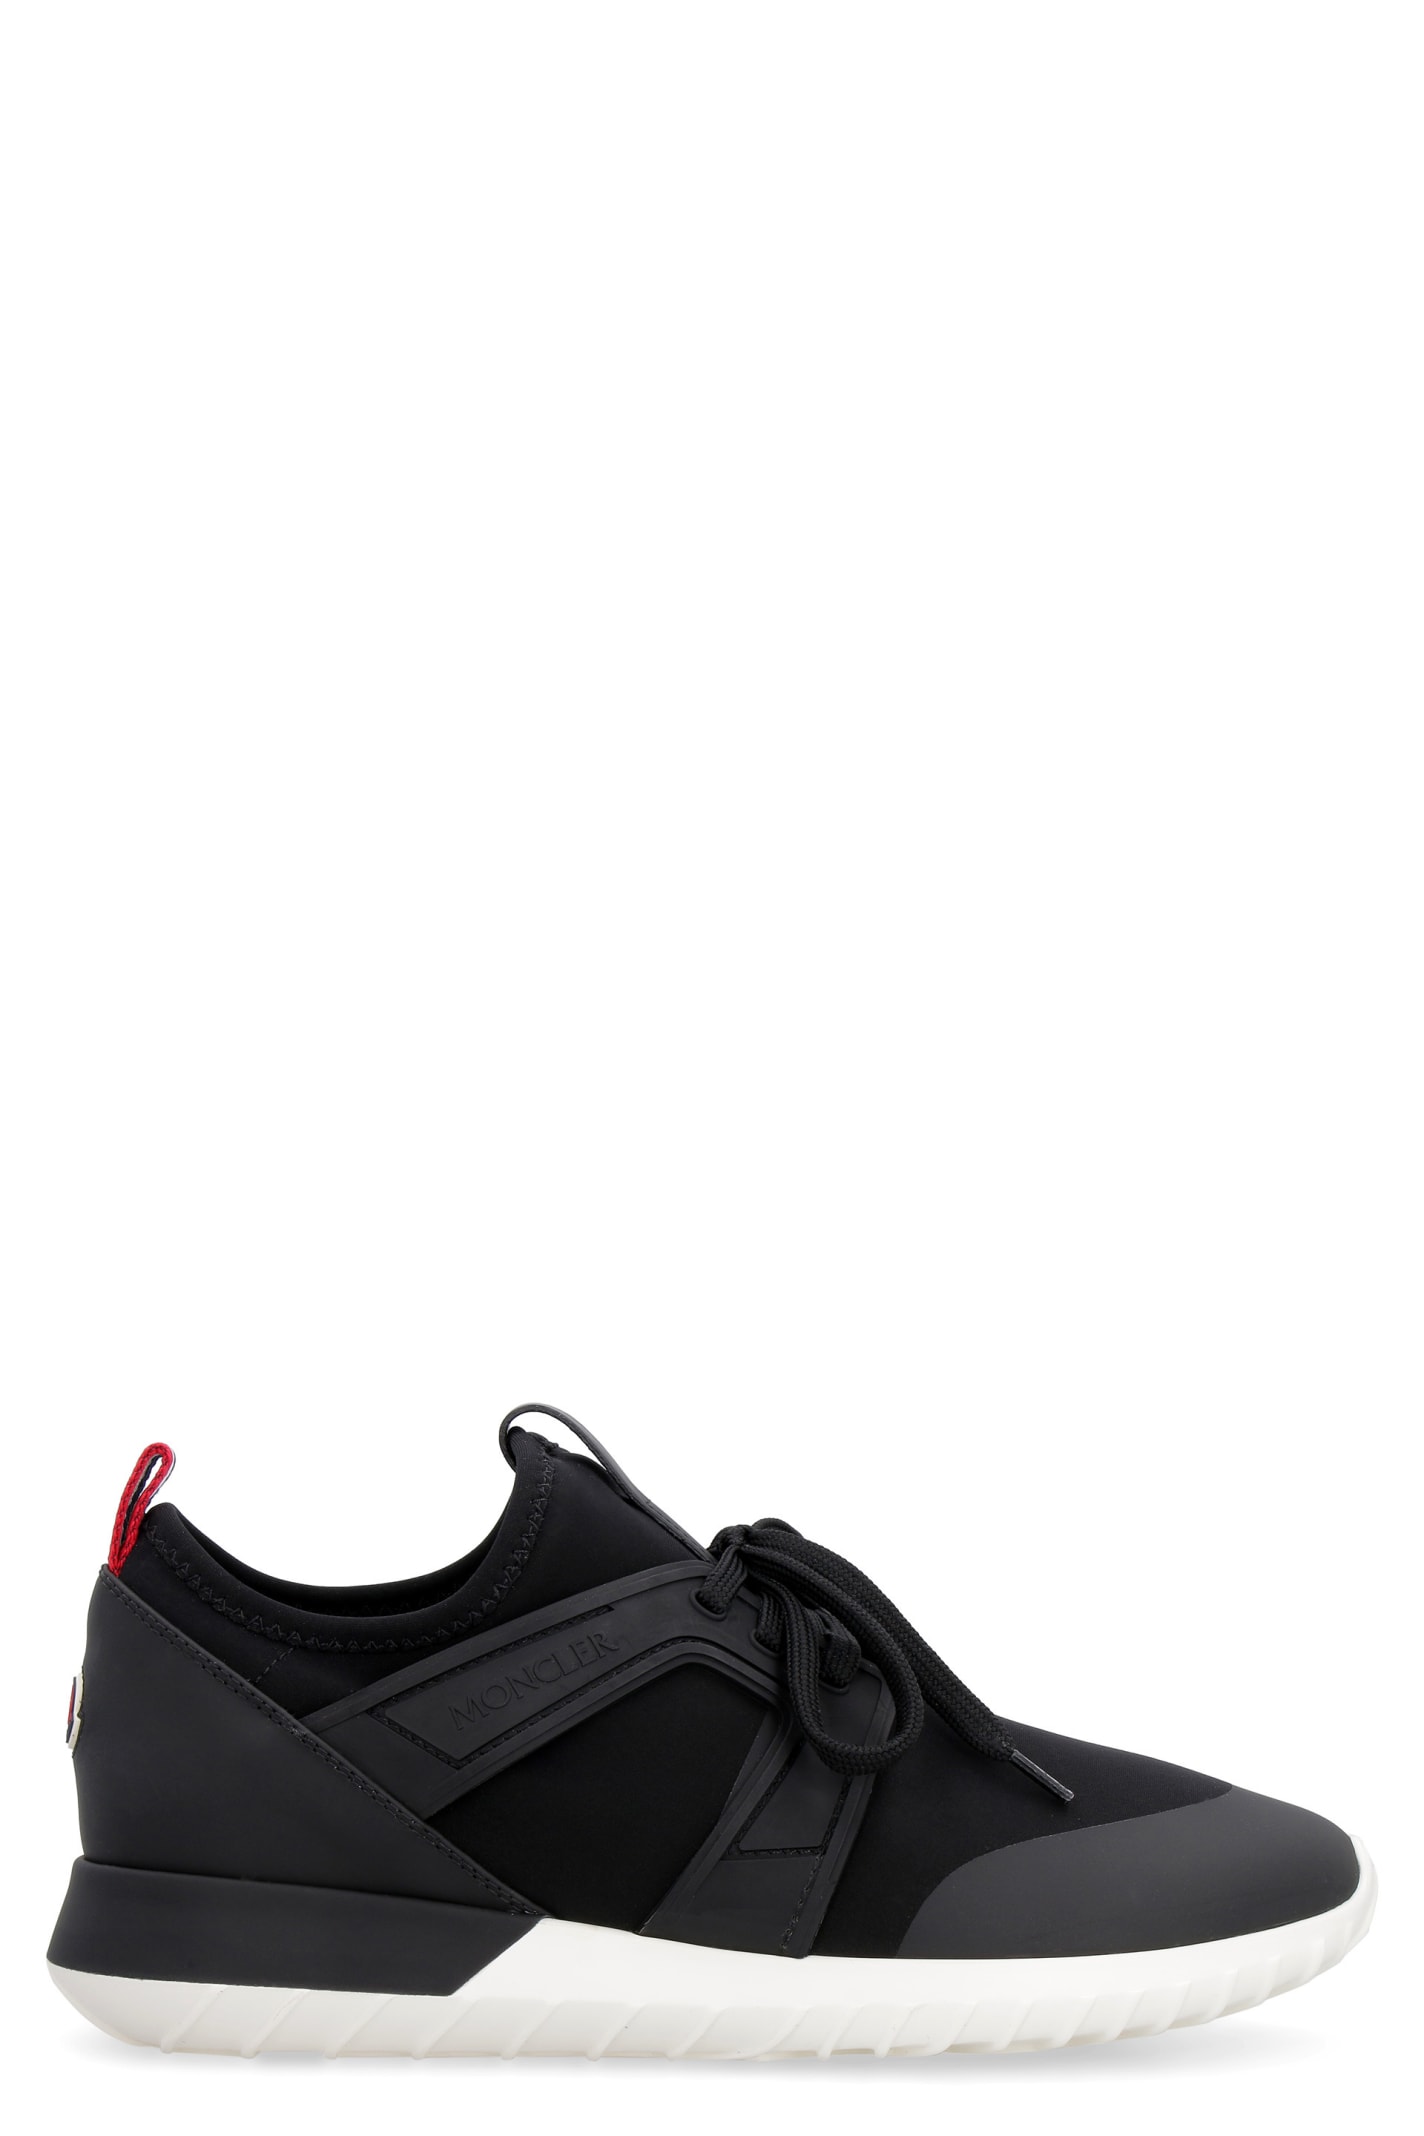 Moncler Meline Techno Fabric And Leather Sneakers